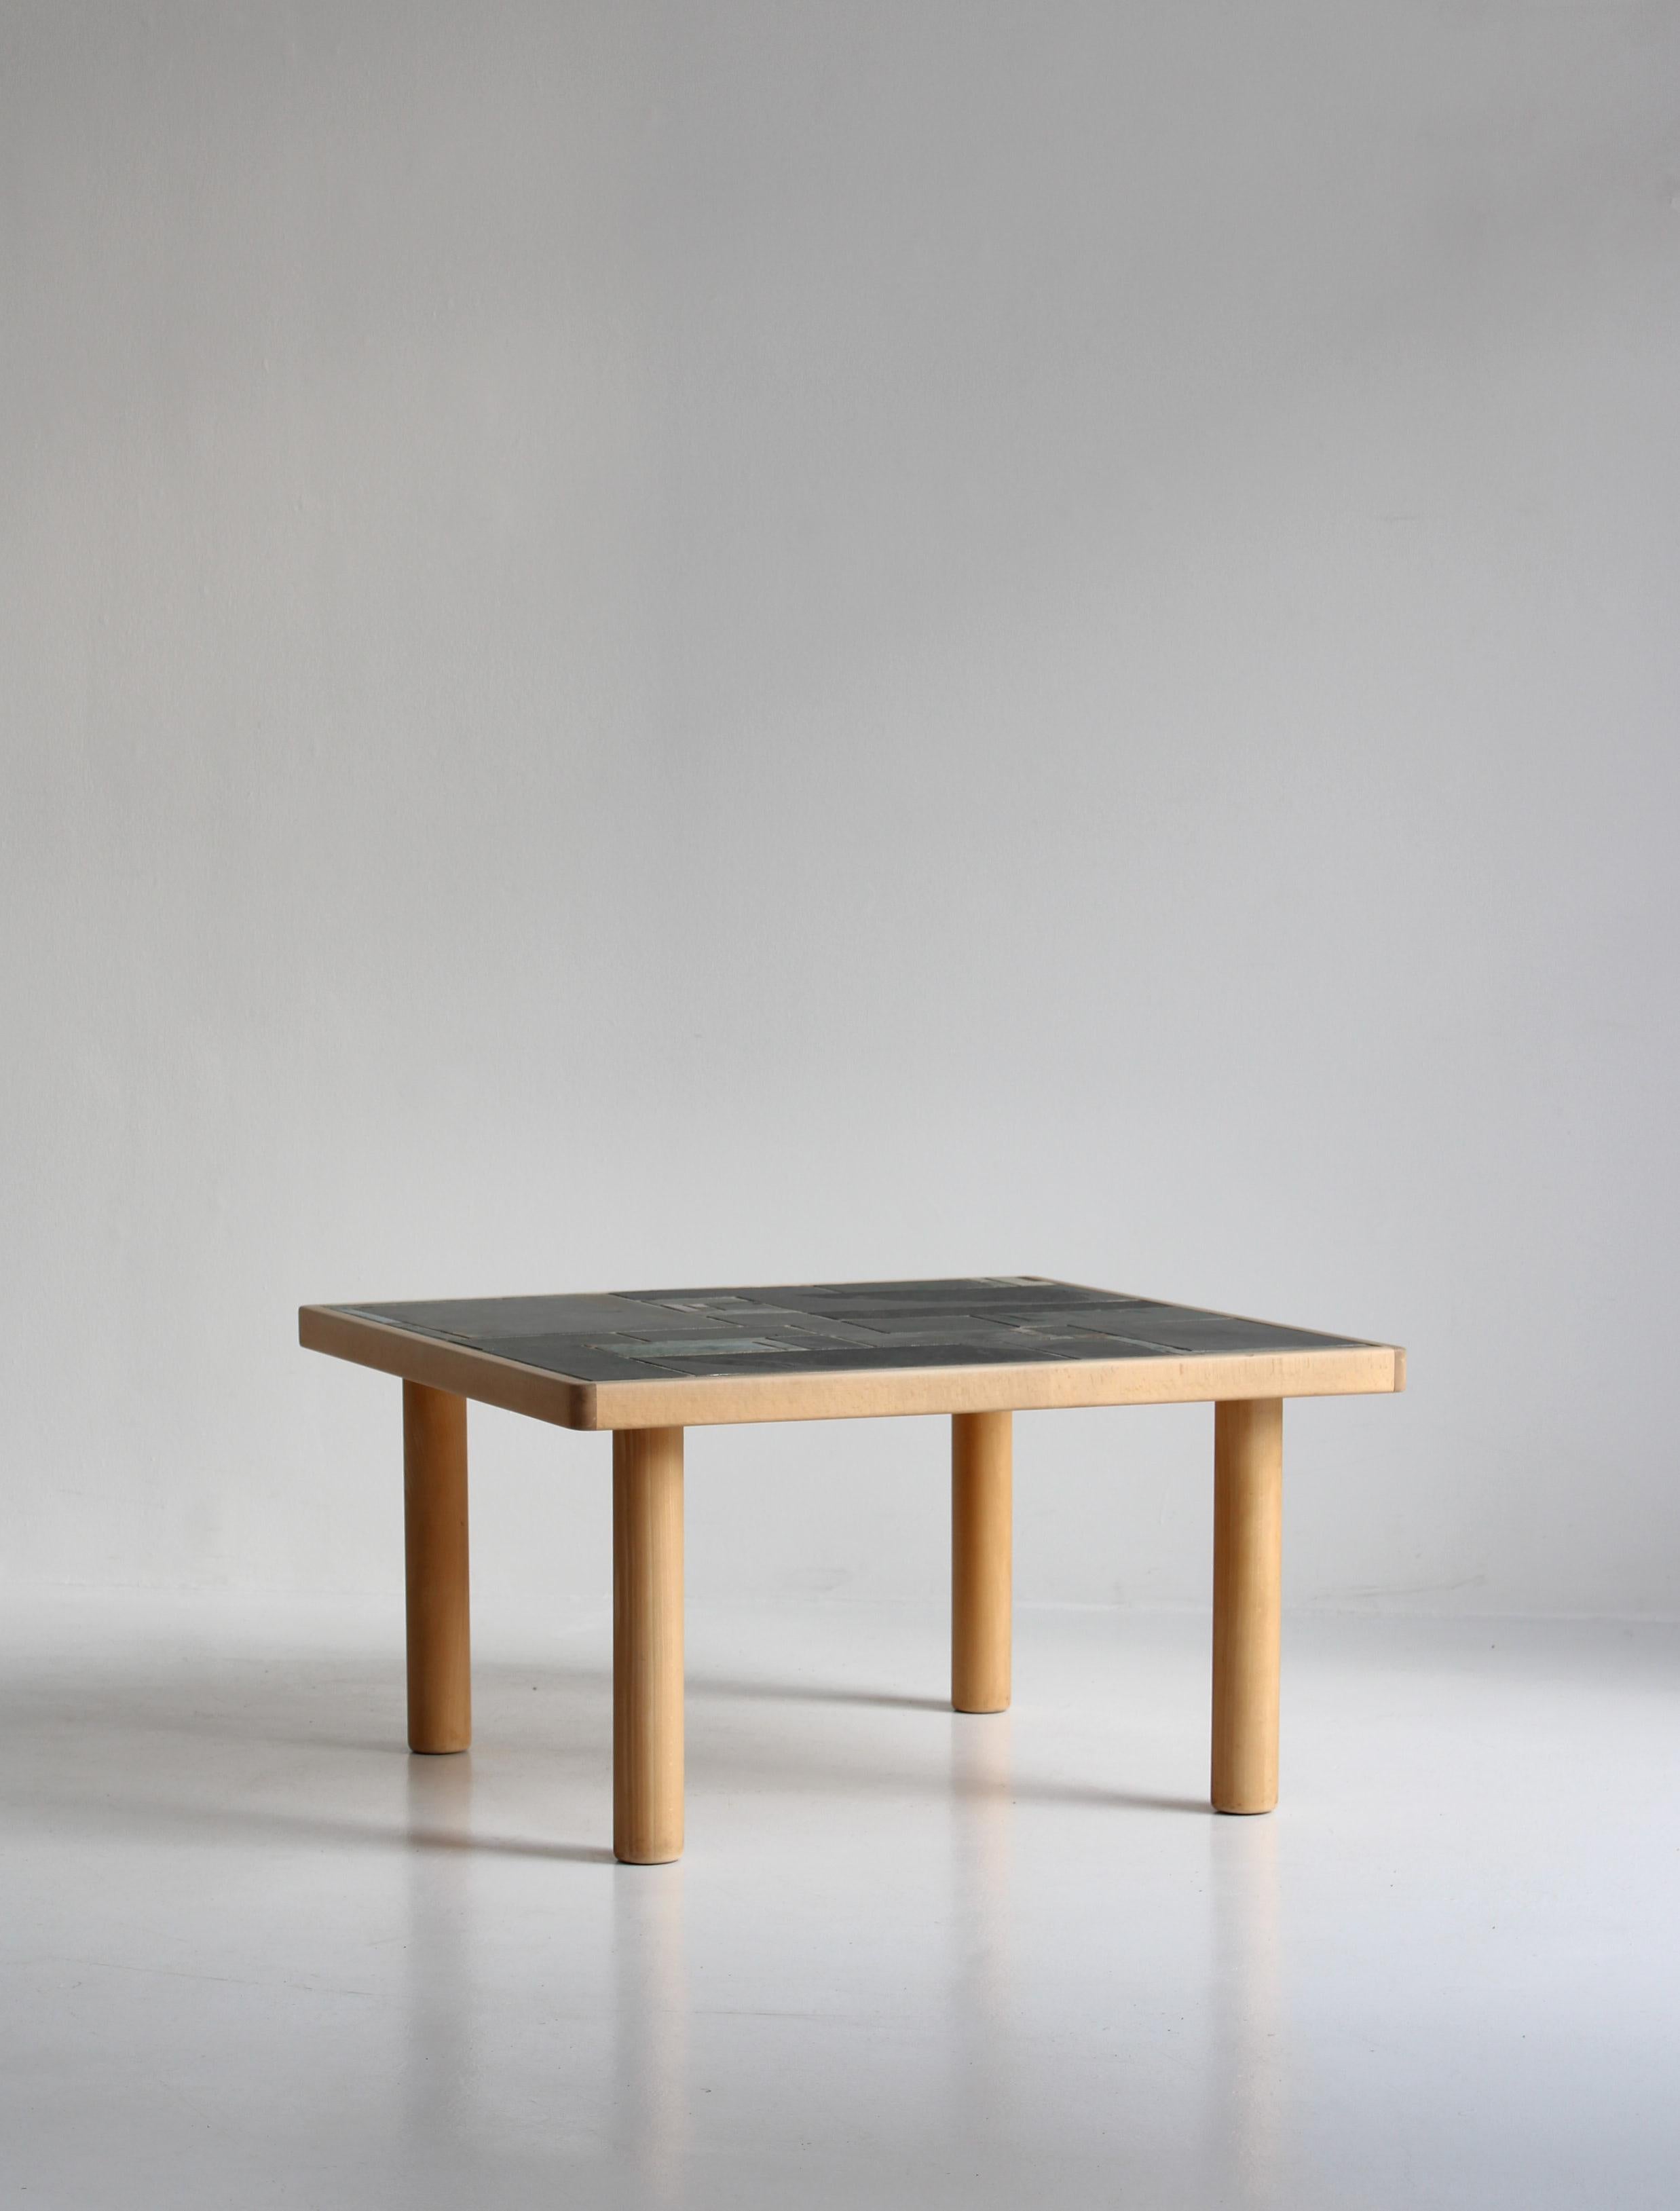 Square Coffee Table in Beechwood and Ceramic Tiles by Sallingboe, Denmark, 1970s For Sale 5